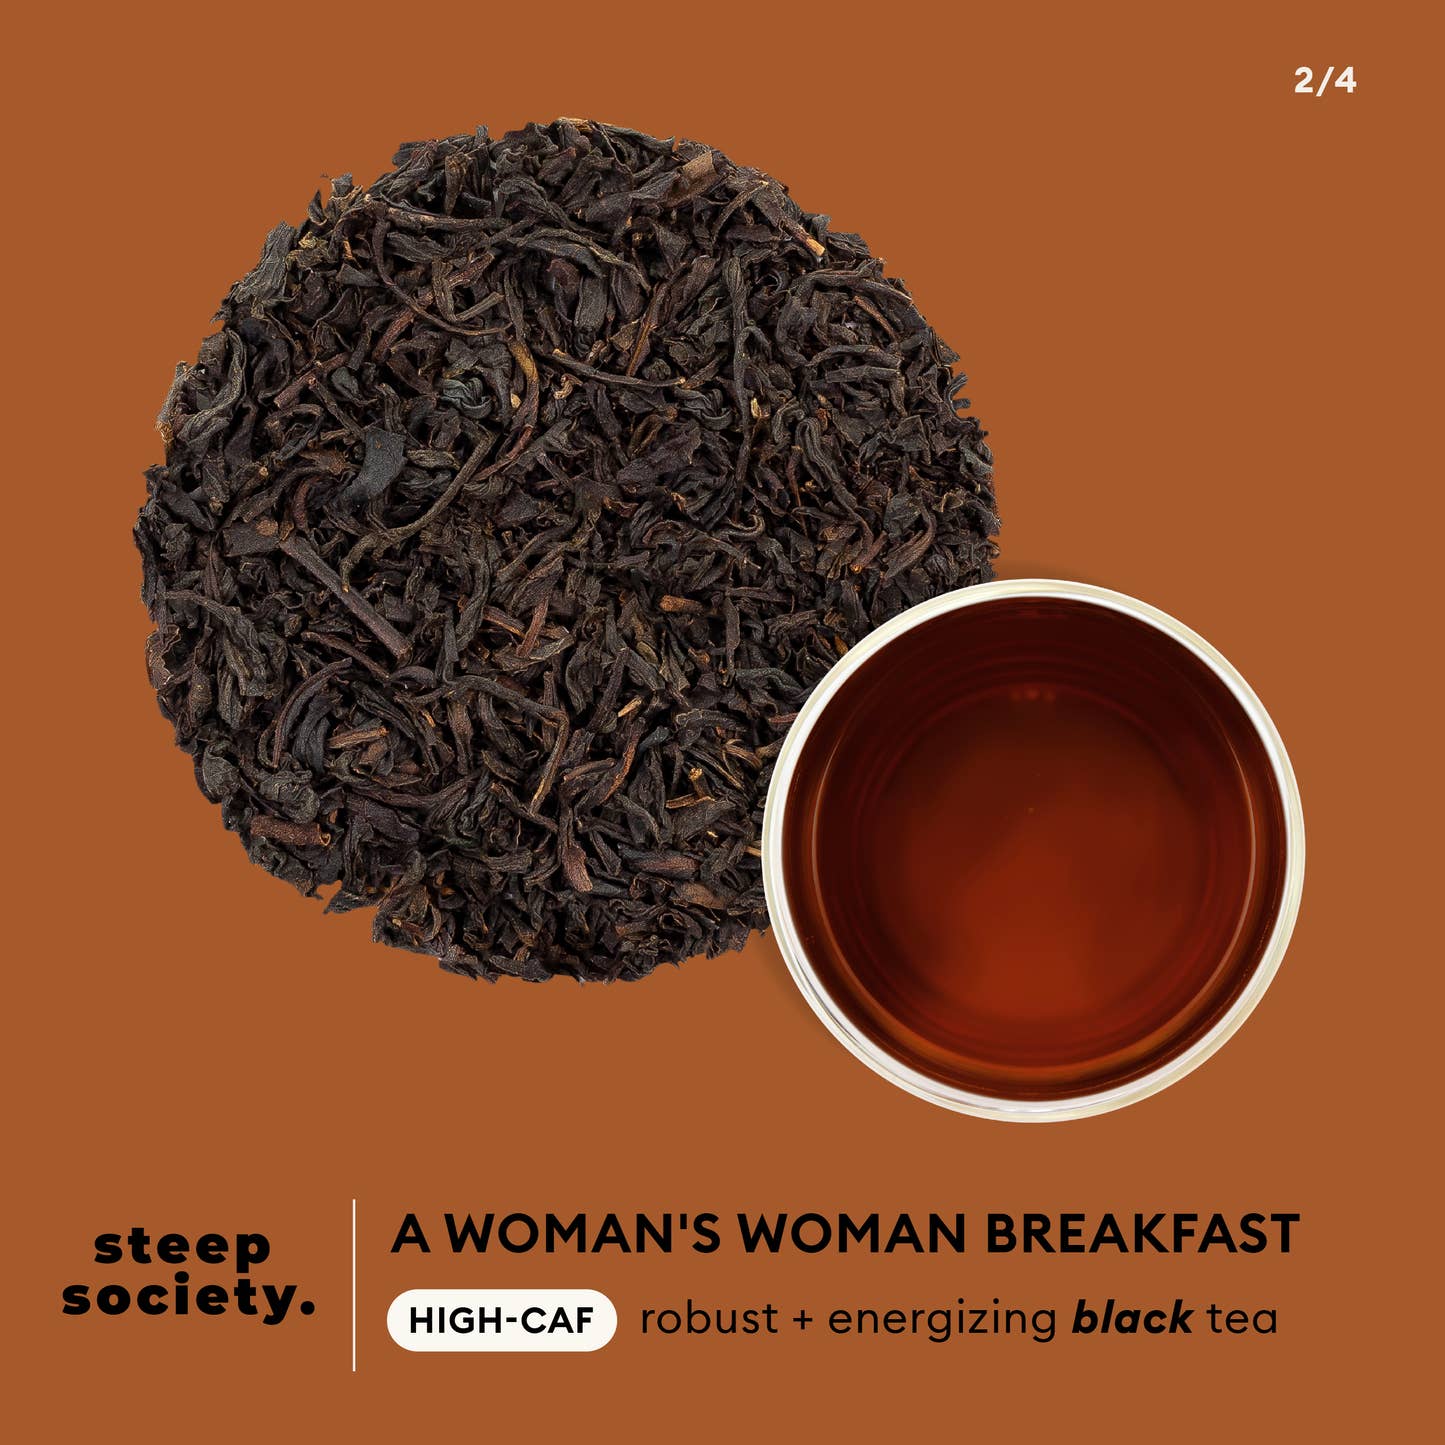 Steep Society - A Woman's Woman Breakfast high-caf, robust + energizing infographic